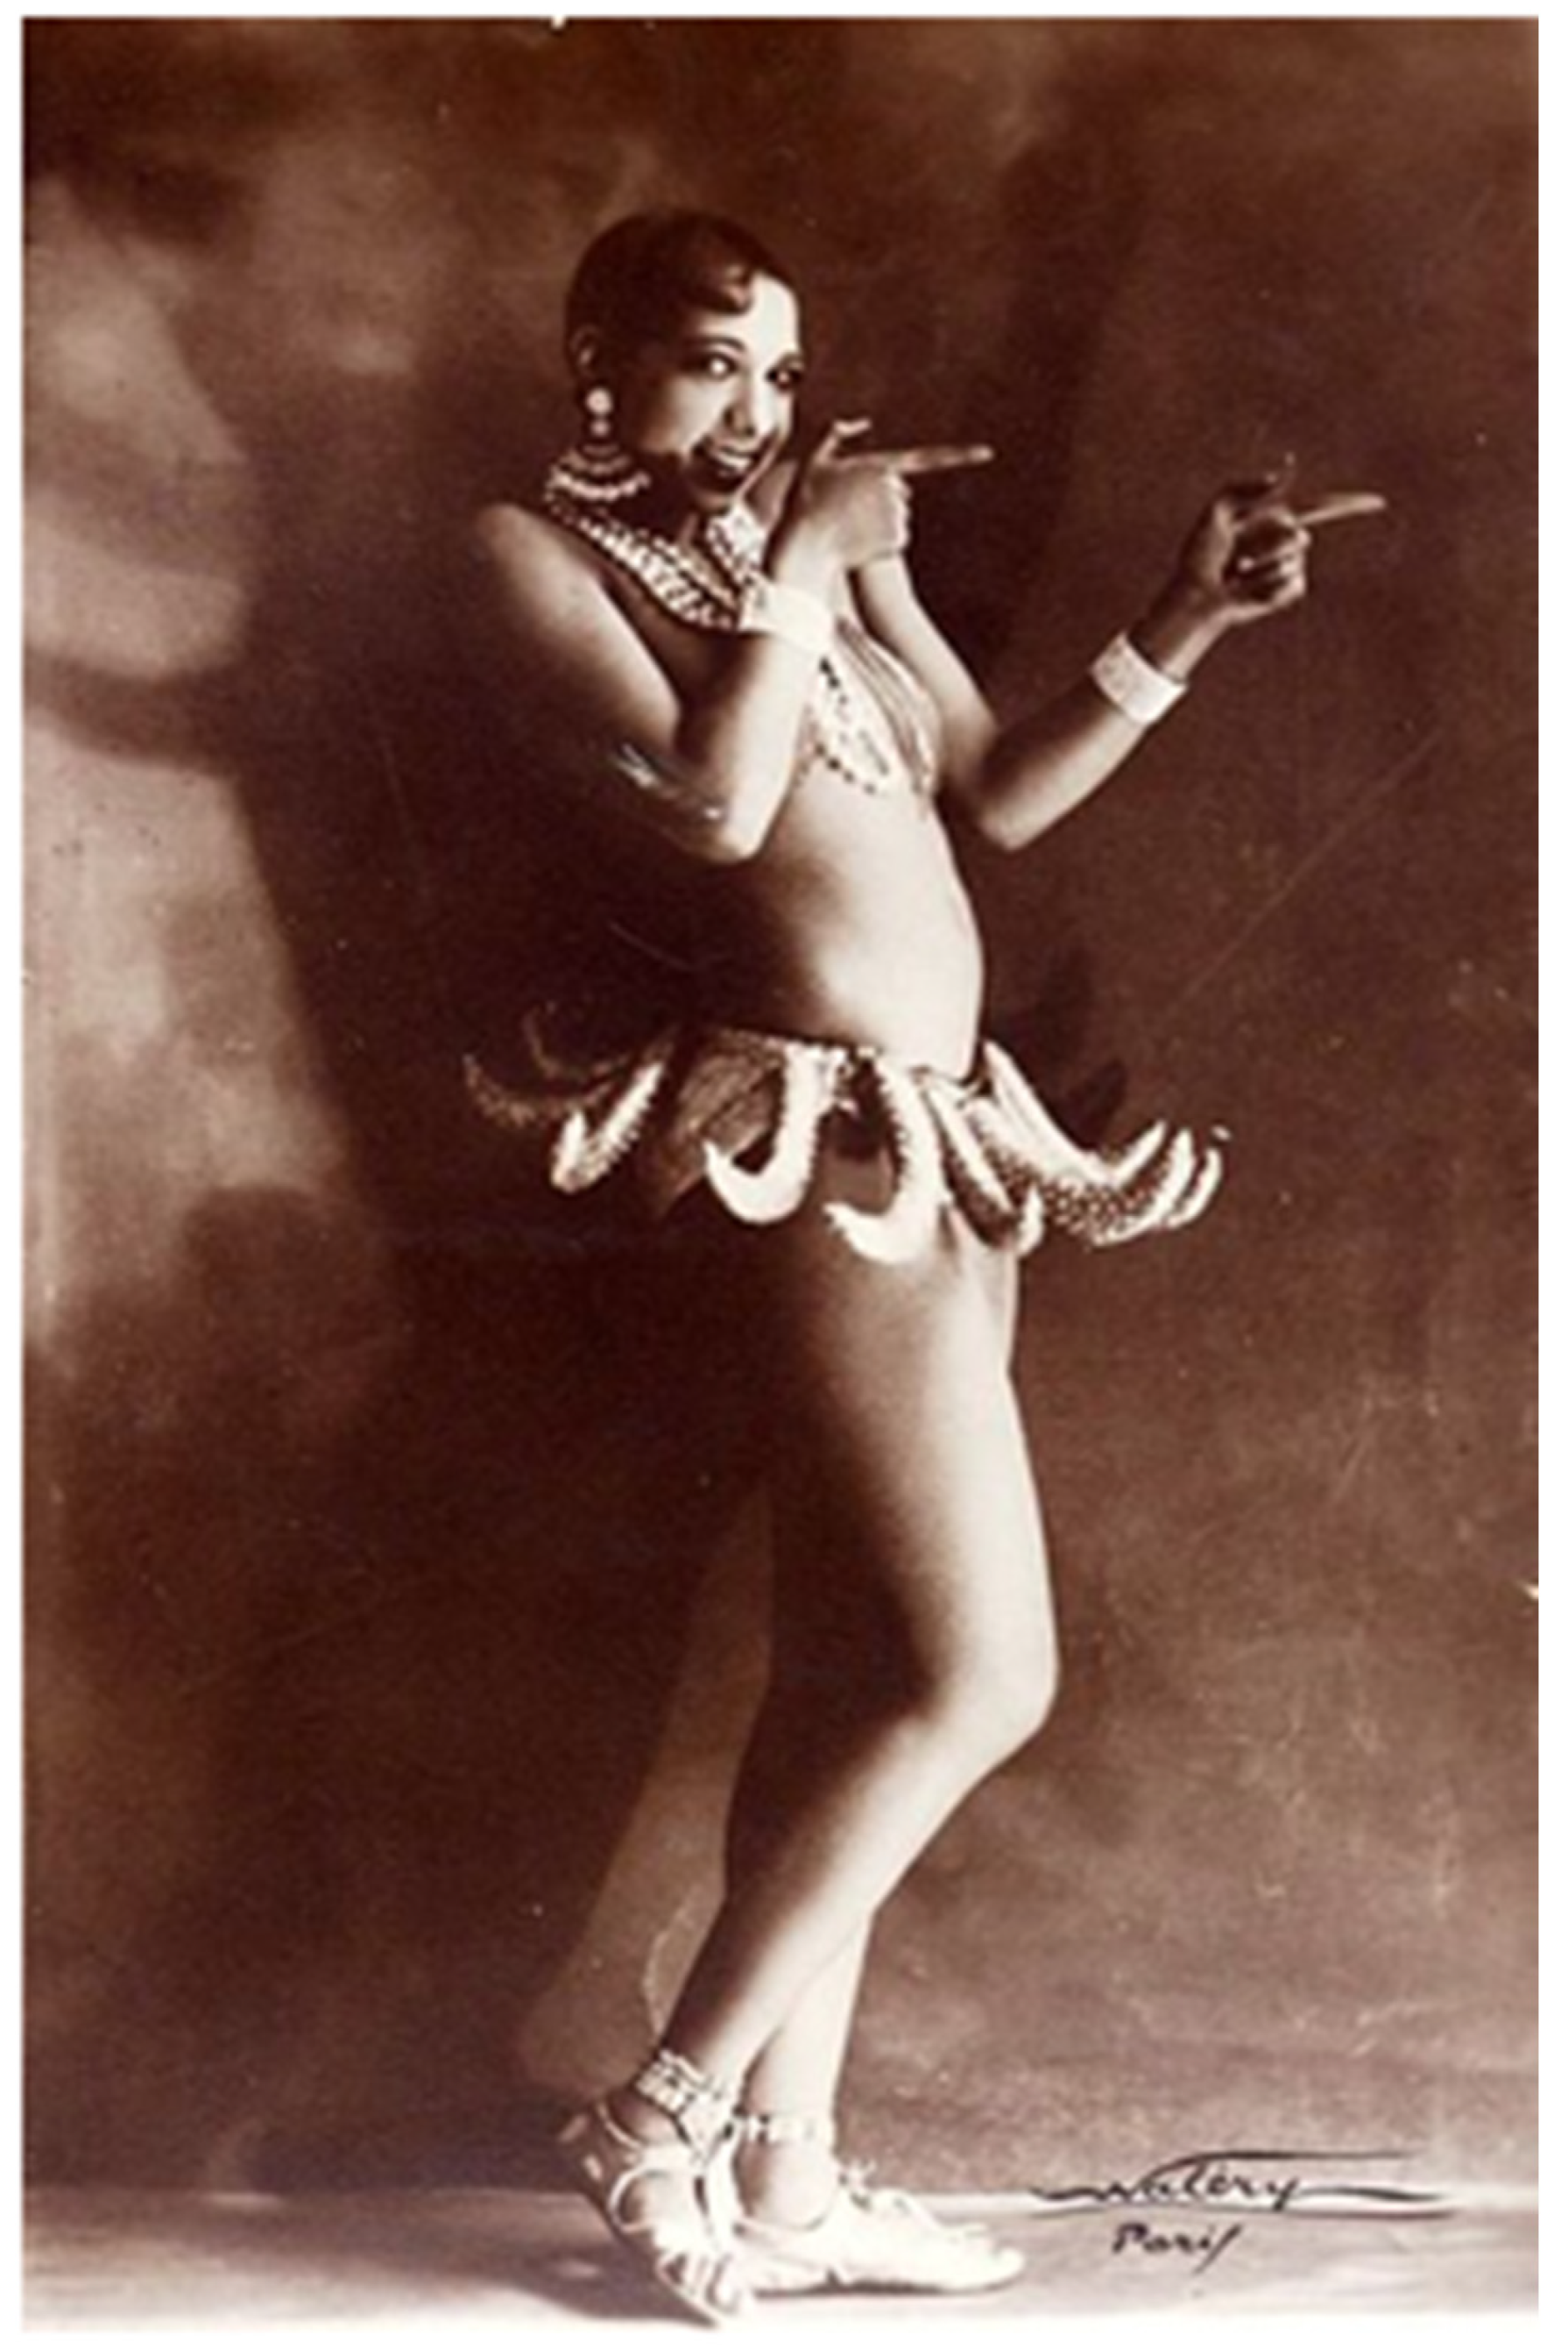 Chubby Teen Spread Legs - Humanities | Free Full-Text | “The Whole Ensemble”: Gwendolyn  Bennett, Josephine Baker, and Interartistic Exchange in Black American  Modernism